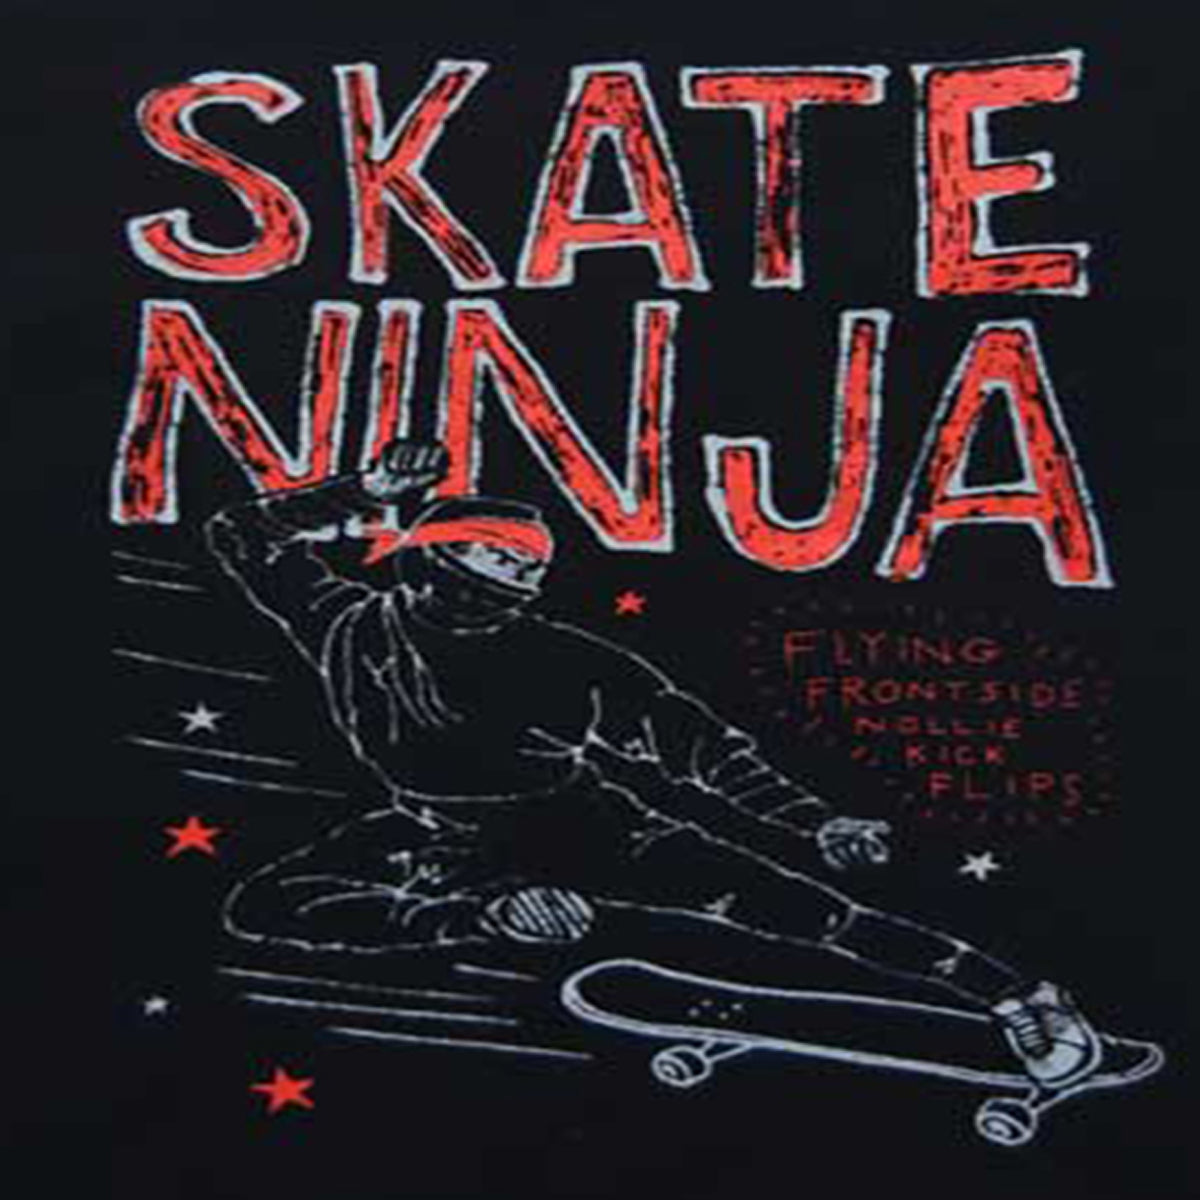 Boys Black T-Shirt with Skate Ninja Graphic - Cool Action Wear